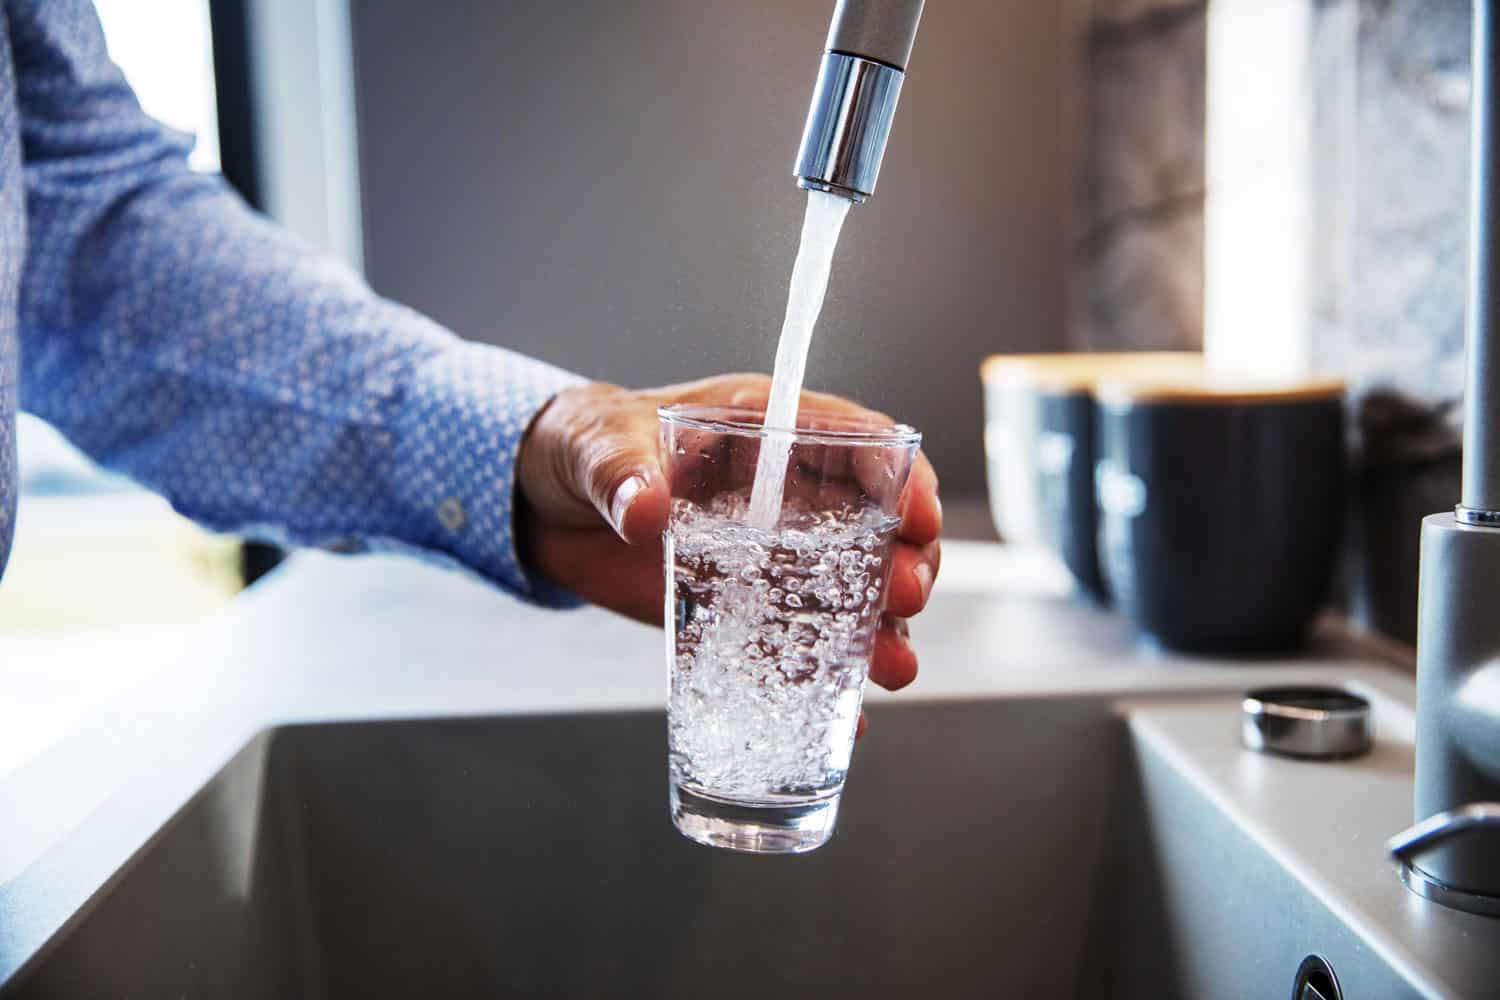 Close up of a woman hand filling a glass of water directly from the tap.